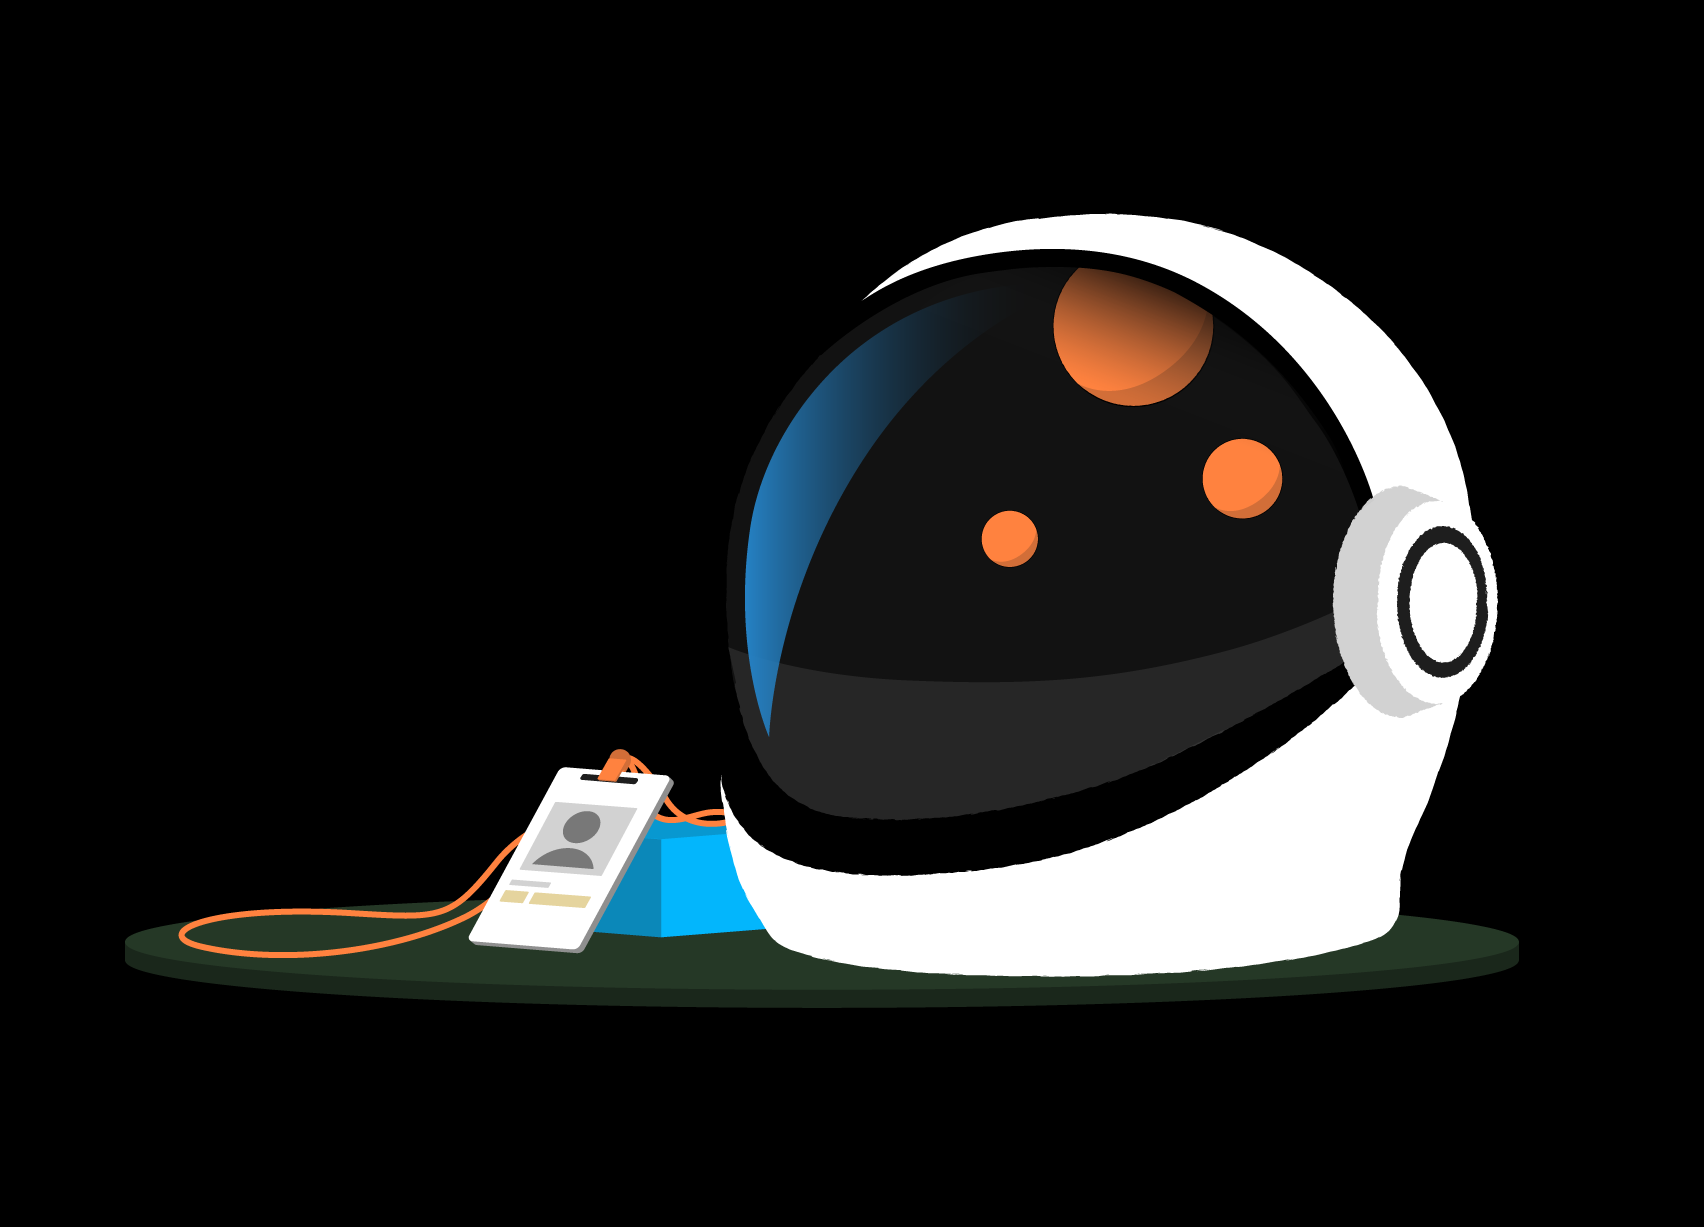 Asial - Custom Illustrations - The careers page welcomes potential hires with a space helmet and a journey through uncharted tech adventures.